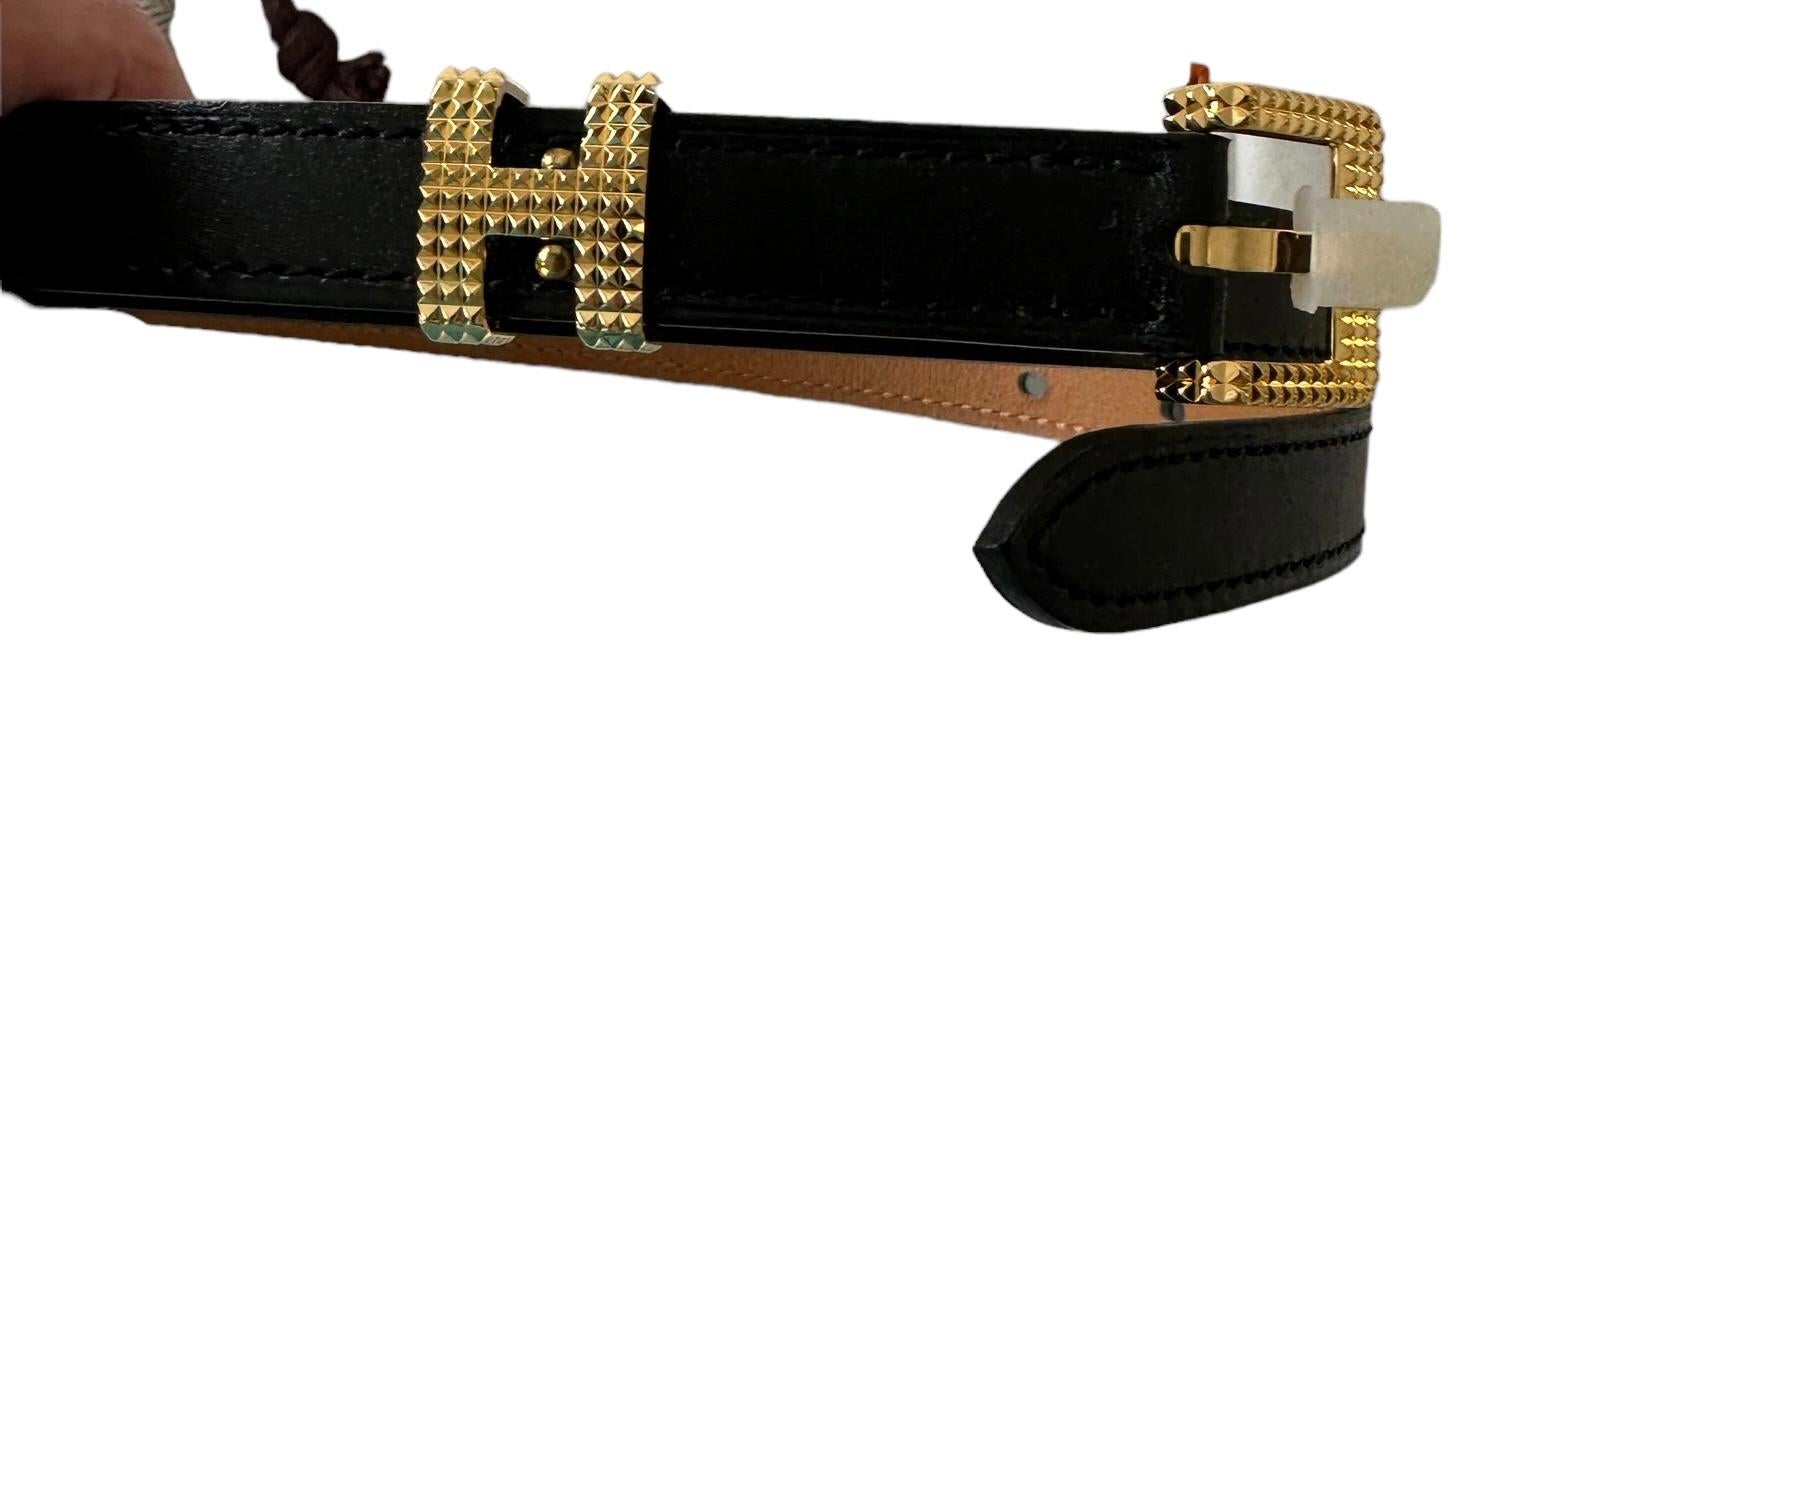 Hermes
Hermes is a luxury brand known for its high-quality accessories, especially their leather goods, including belts.  
H Guillochee 15 Belt is brand new
Guillochee 15 belt Buckle 
Color is black
Pop H belt buckle done in lovely